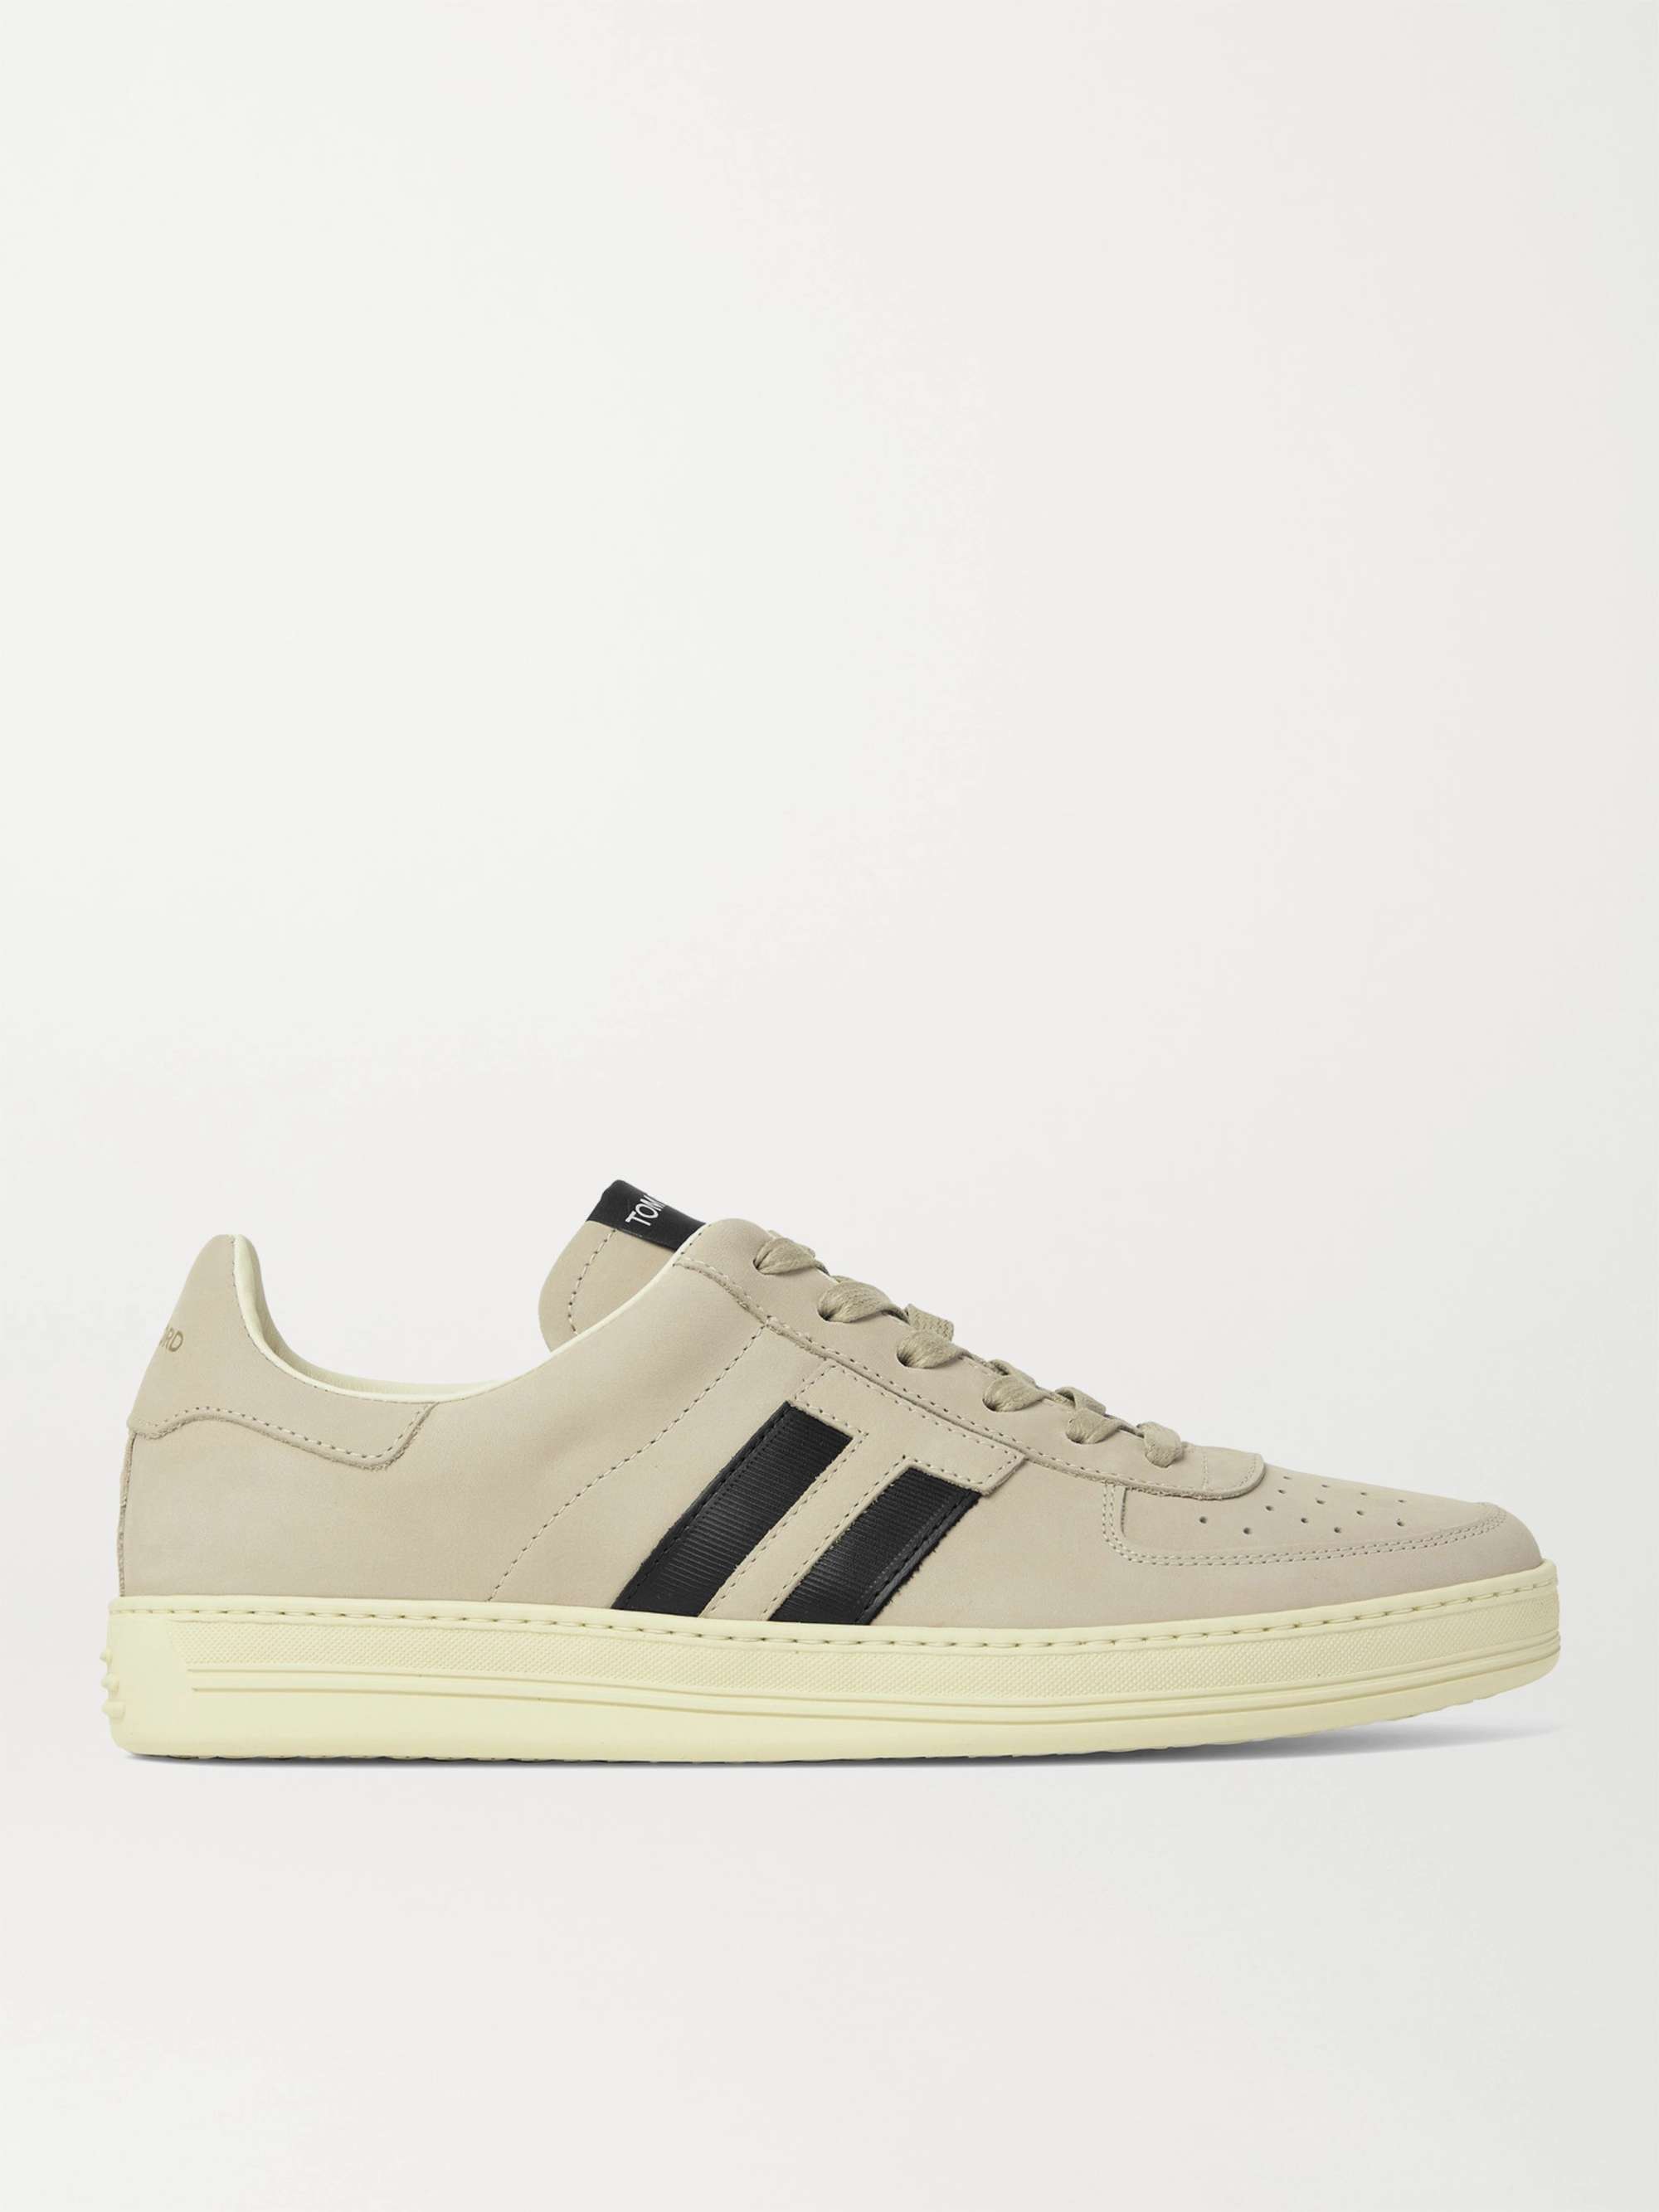 TOM FORD Radcliffe Leather-Trimmed Nubuck Sneakers